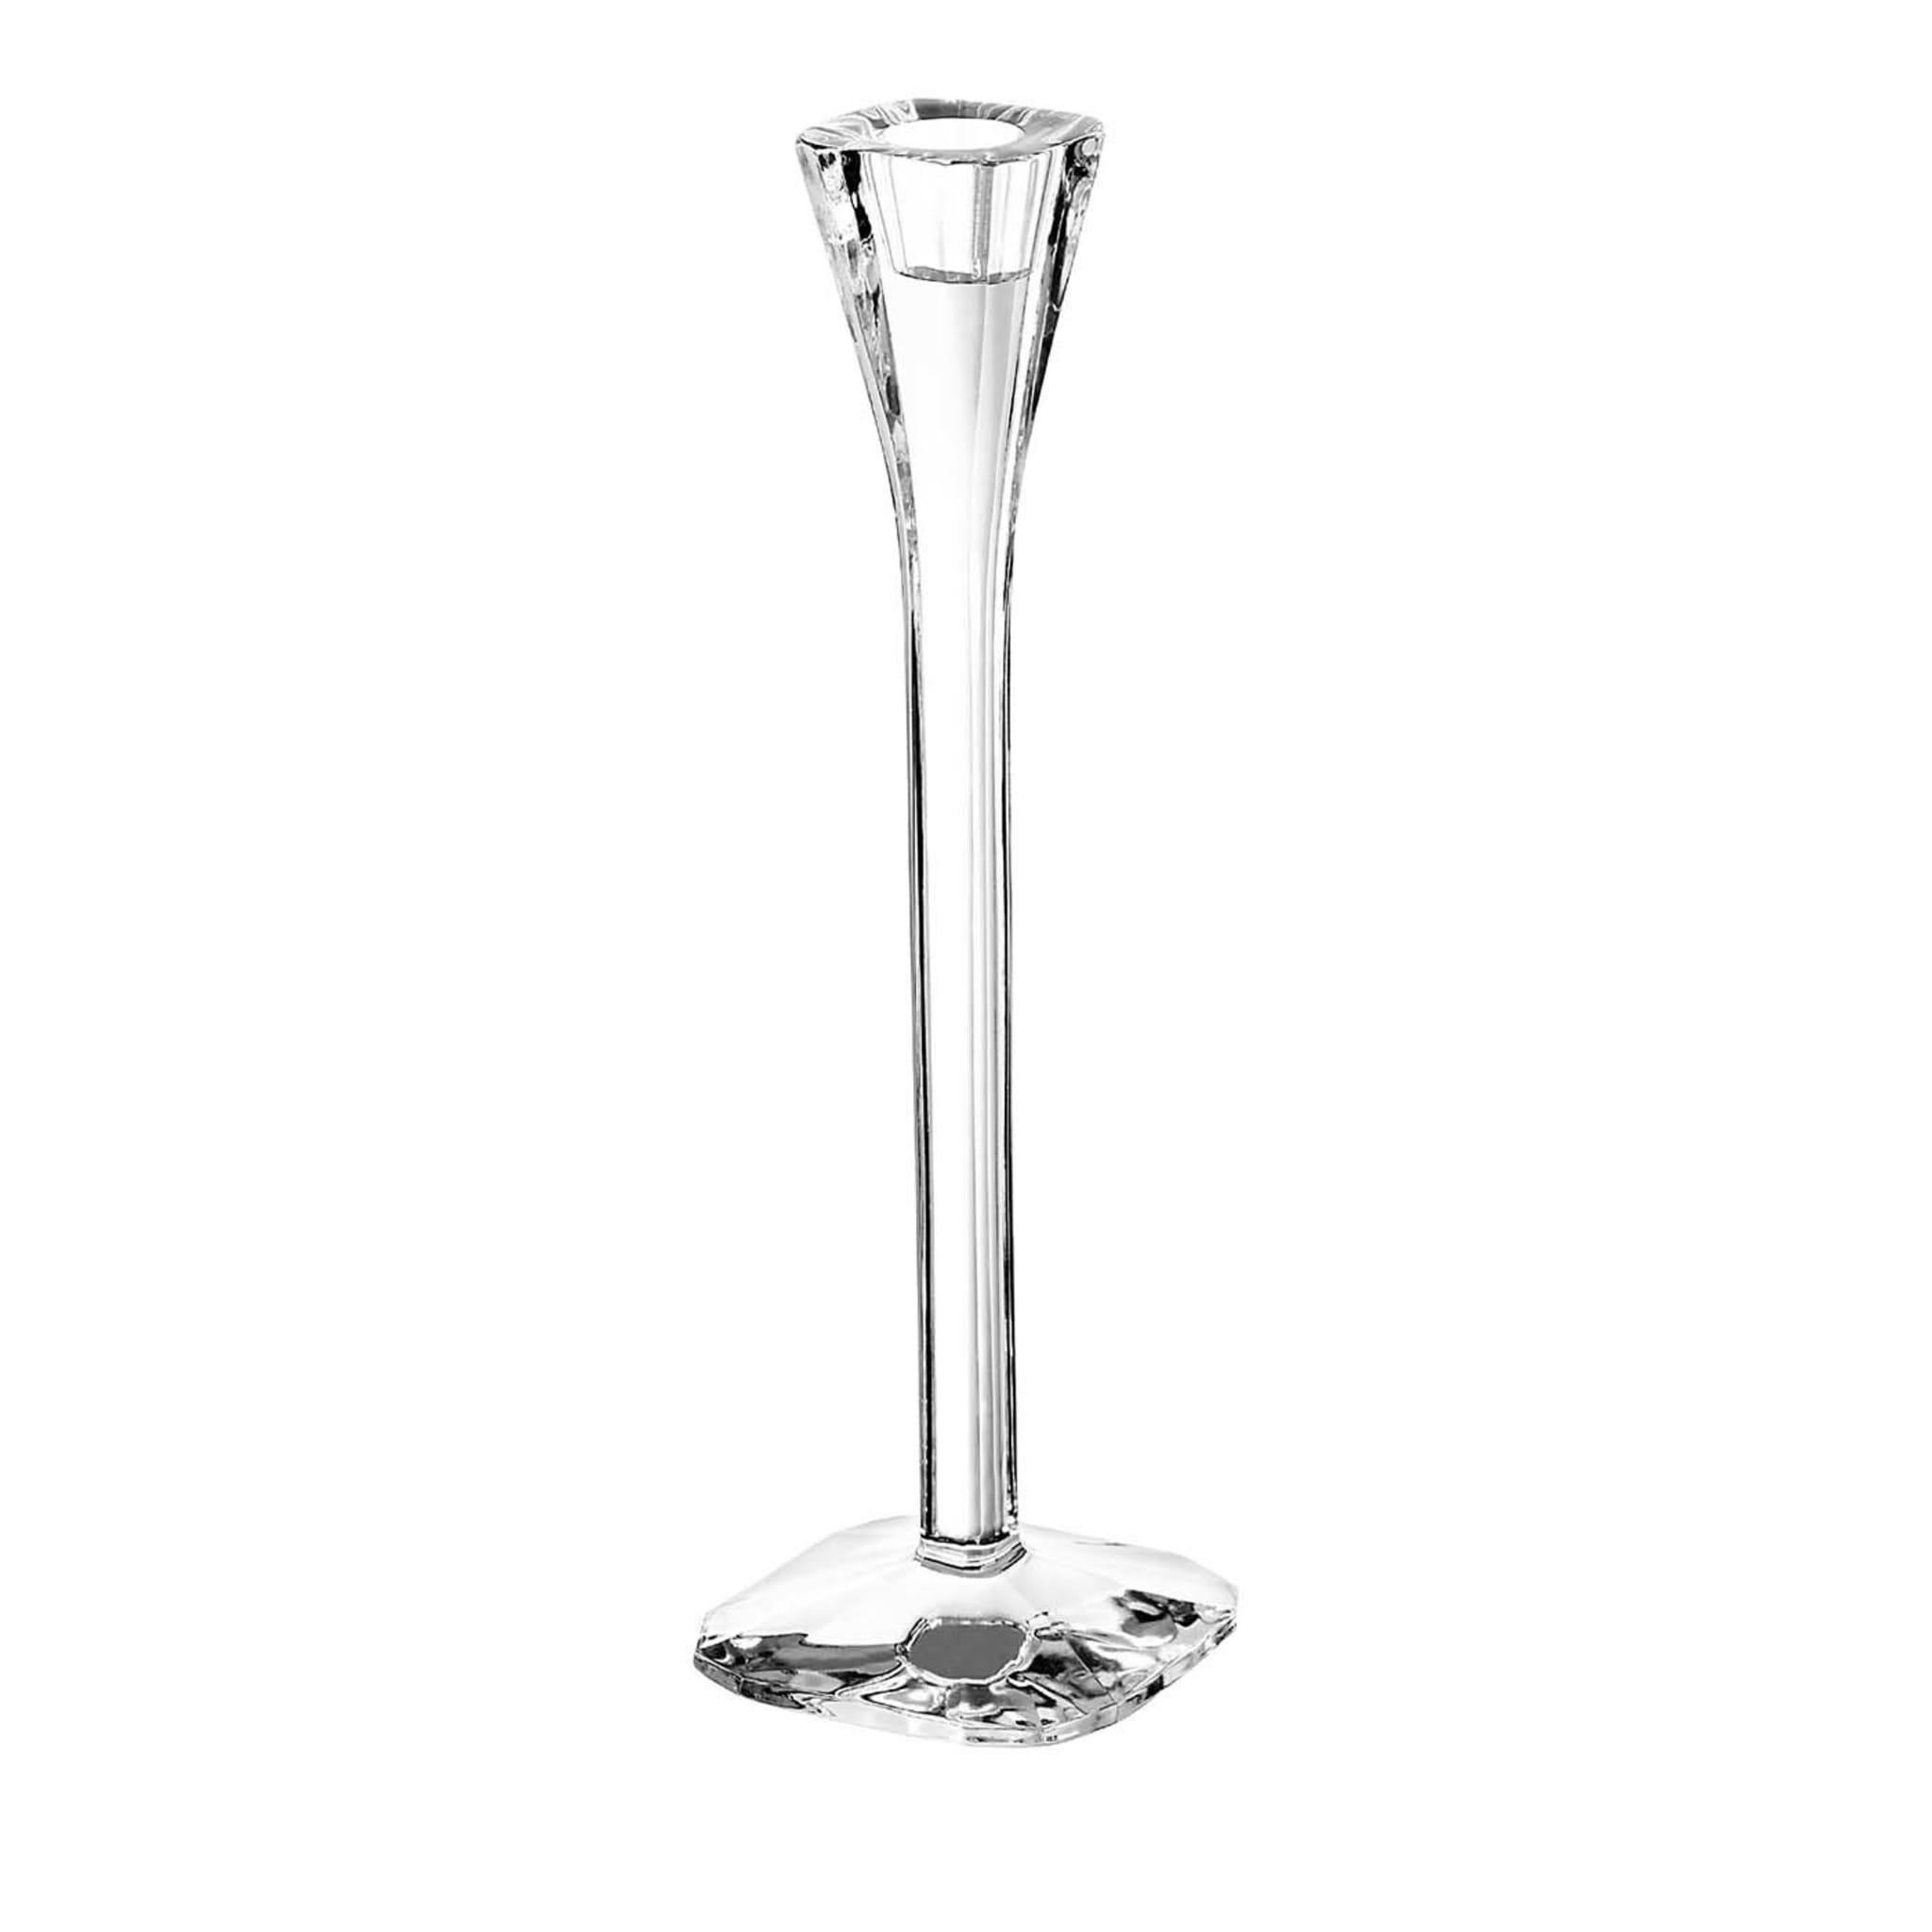 Transparent crystal gives the light reflecting off this candlestick a soft and elegant effect. Part of the Polygon collection by Catya Castel, this elongated design with a square base and flared top was created in 1979 and is a timeless and